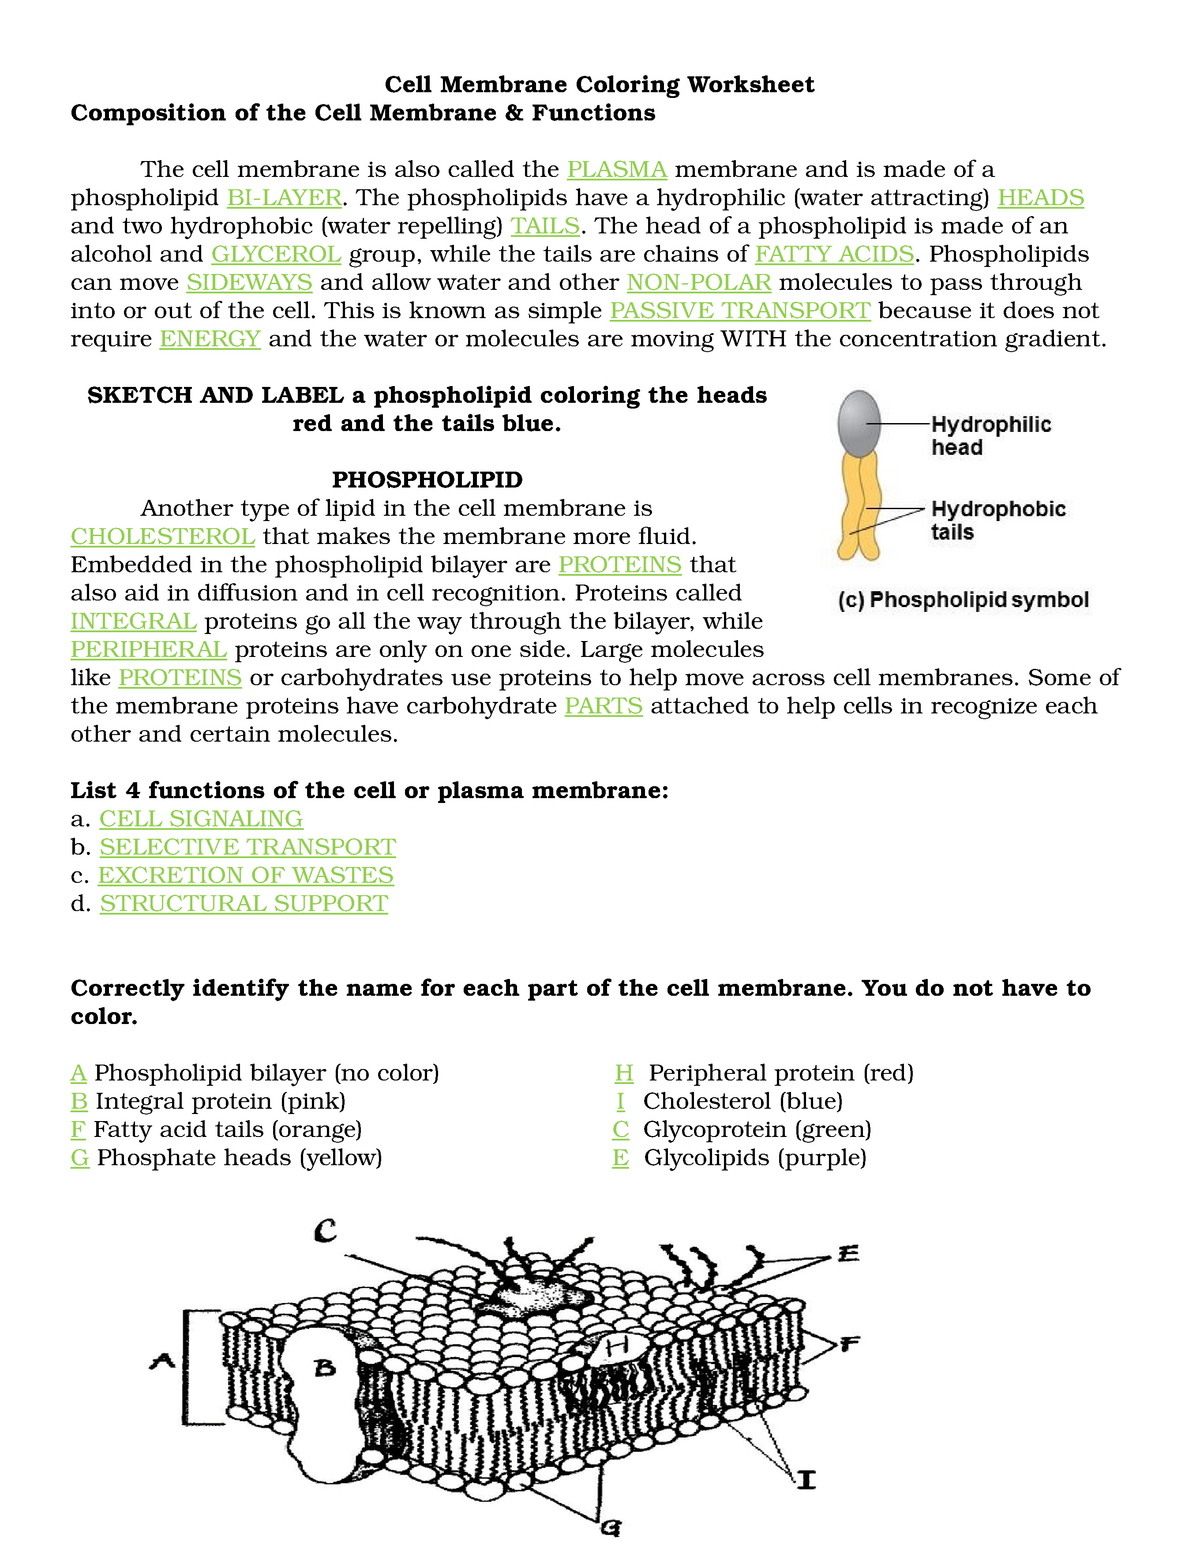 Cell Membrane Coloring Worksheet - BP 10 - Molecular Biology Regarding Cell Membrane Coloring Worksheet Answers